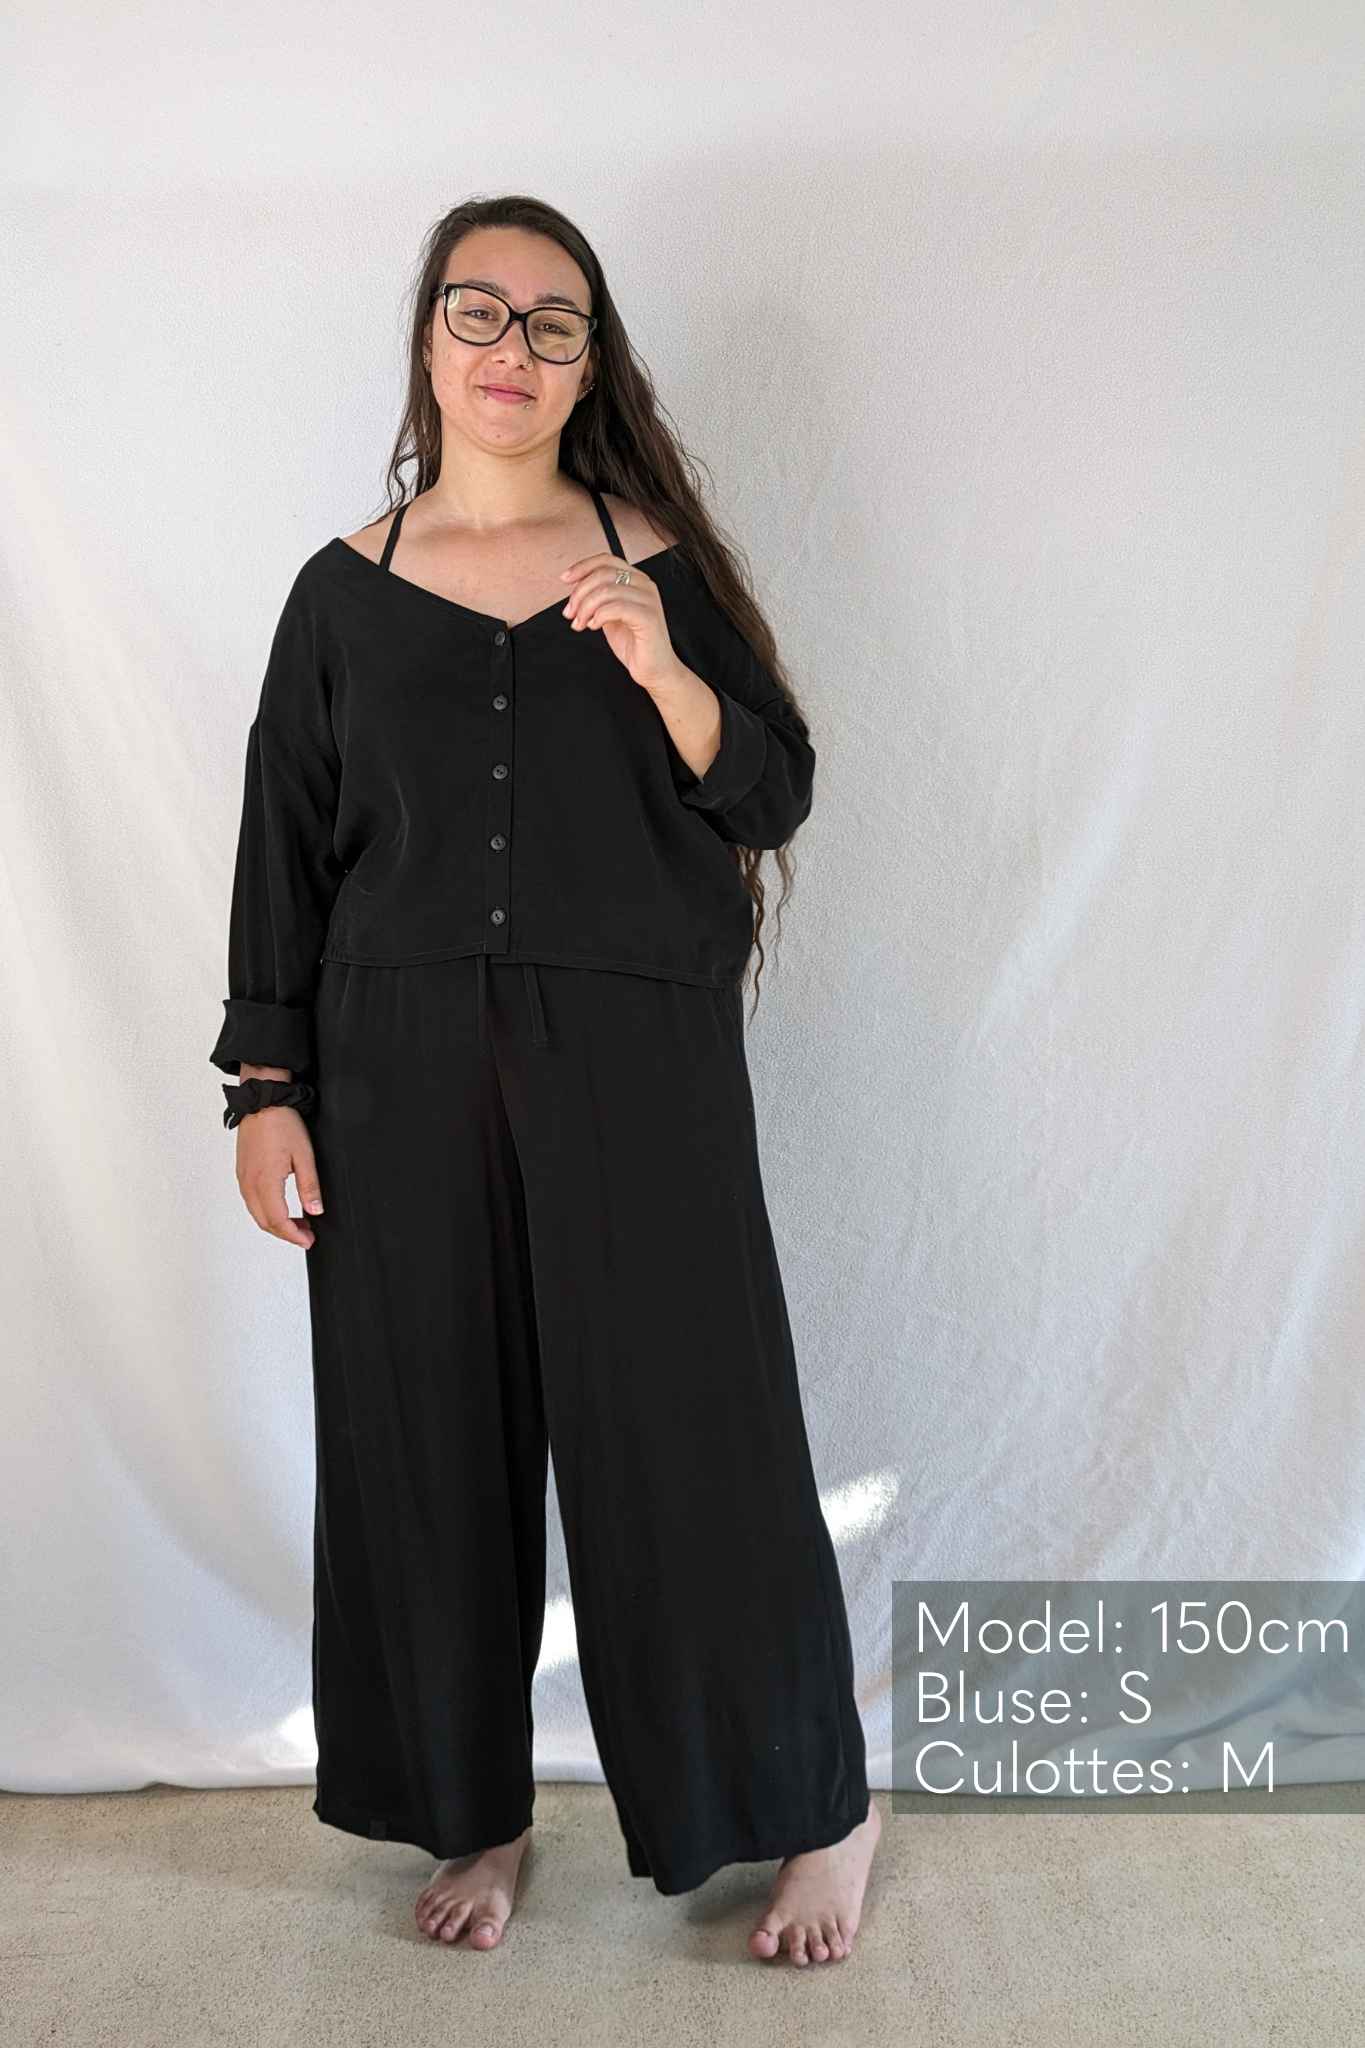 Woman with long hair wears the Coco pyjamas in black.